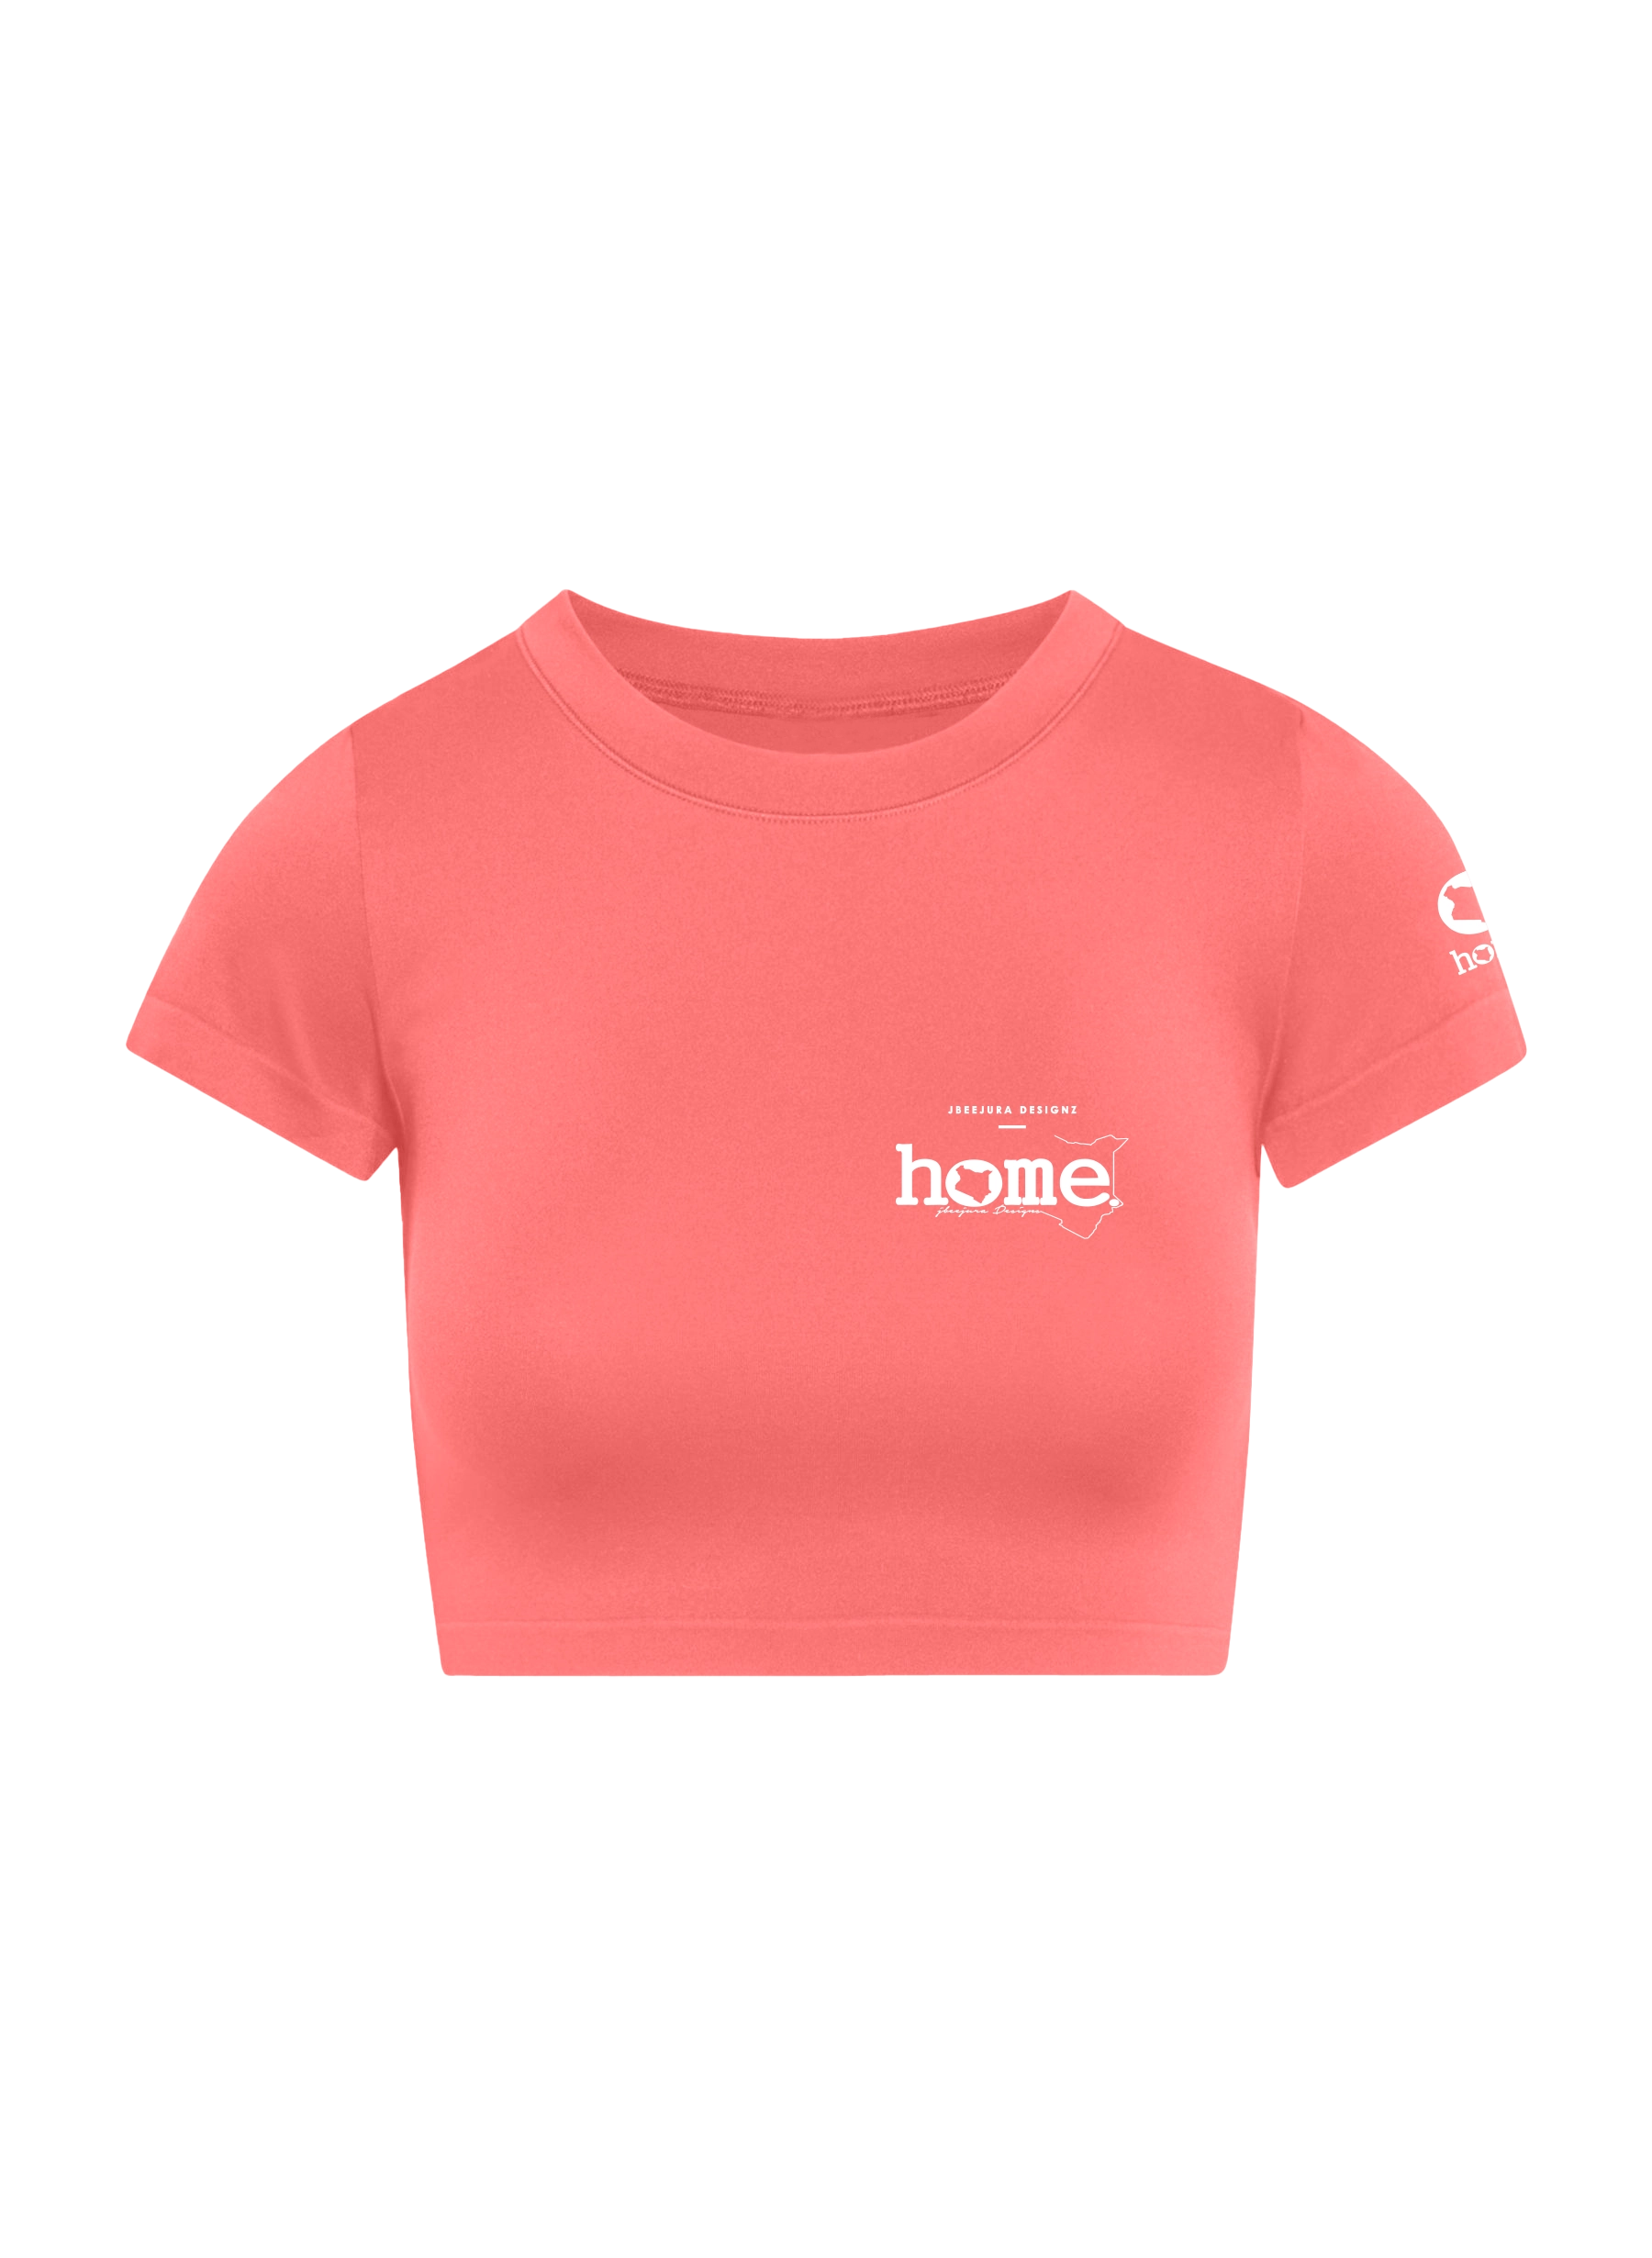 home_254 SHORT SLEEVED MULBERRY CROPPED ARIA TEE WITH A WHITE 3D WORDS PRINT 